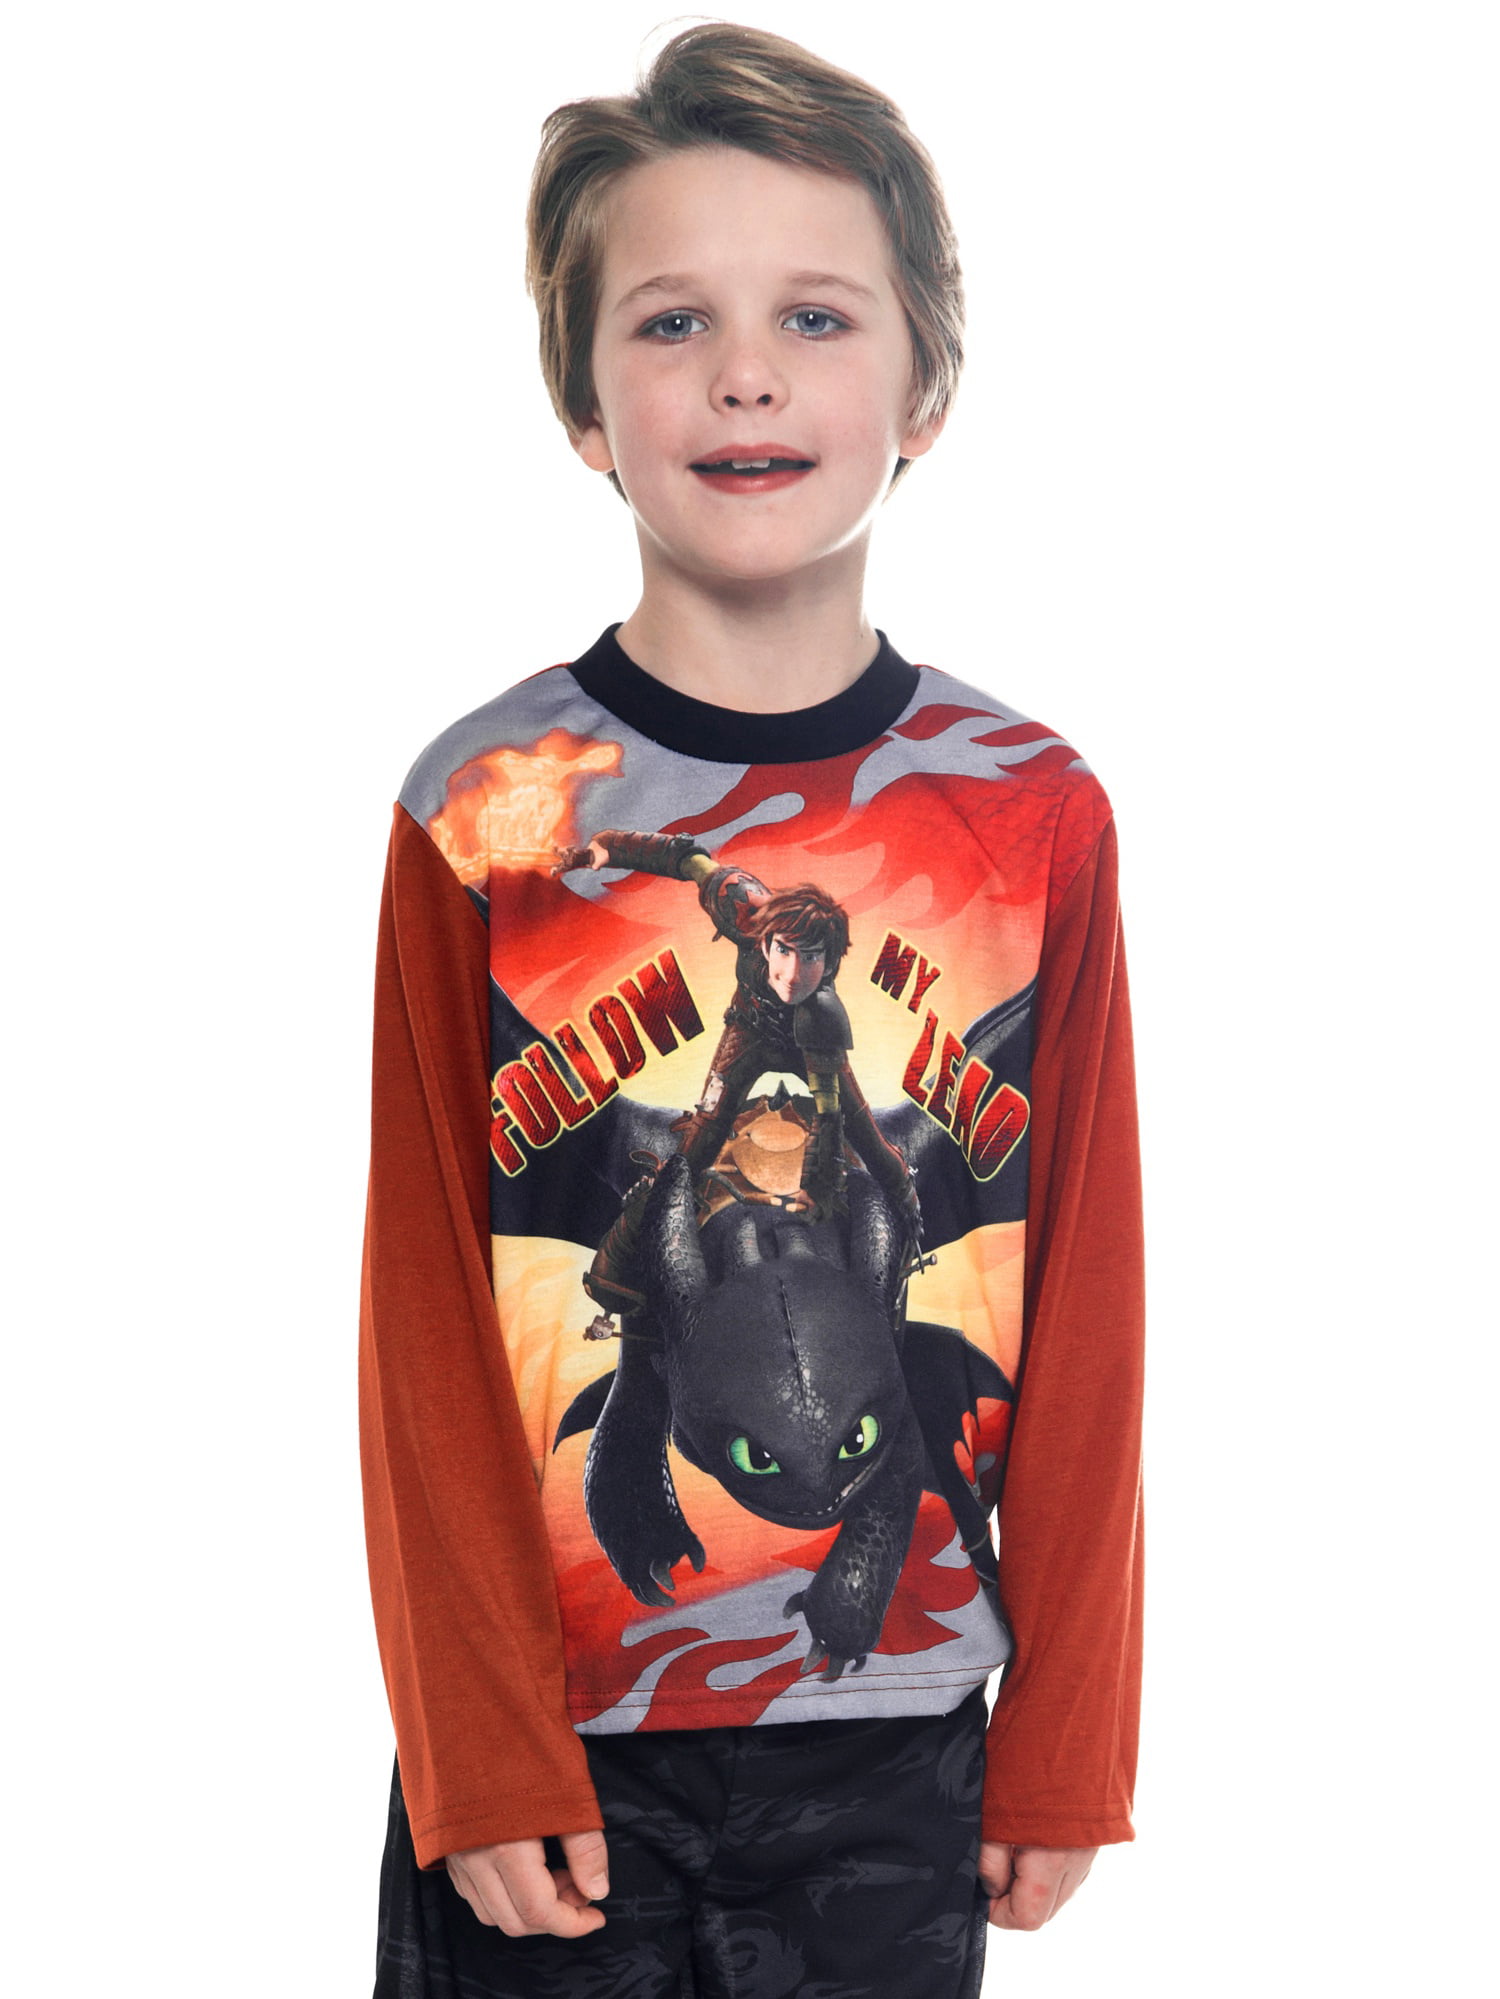 Boys Kids Children Dragons How to Train Your Dragon T-shirt Top Age 4-12 